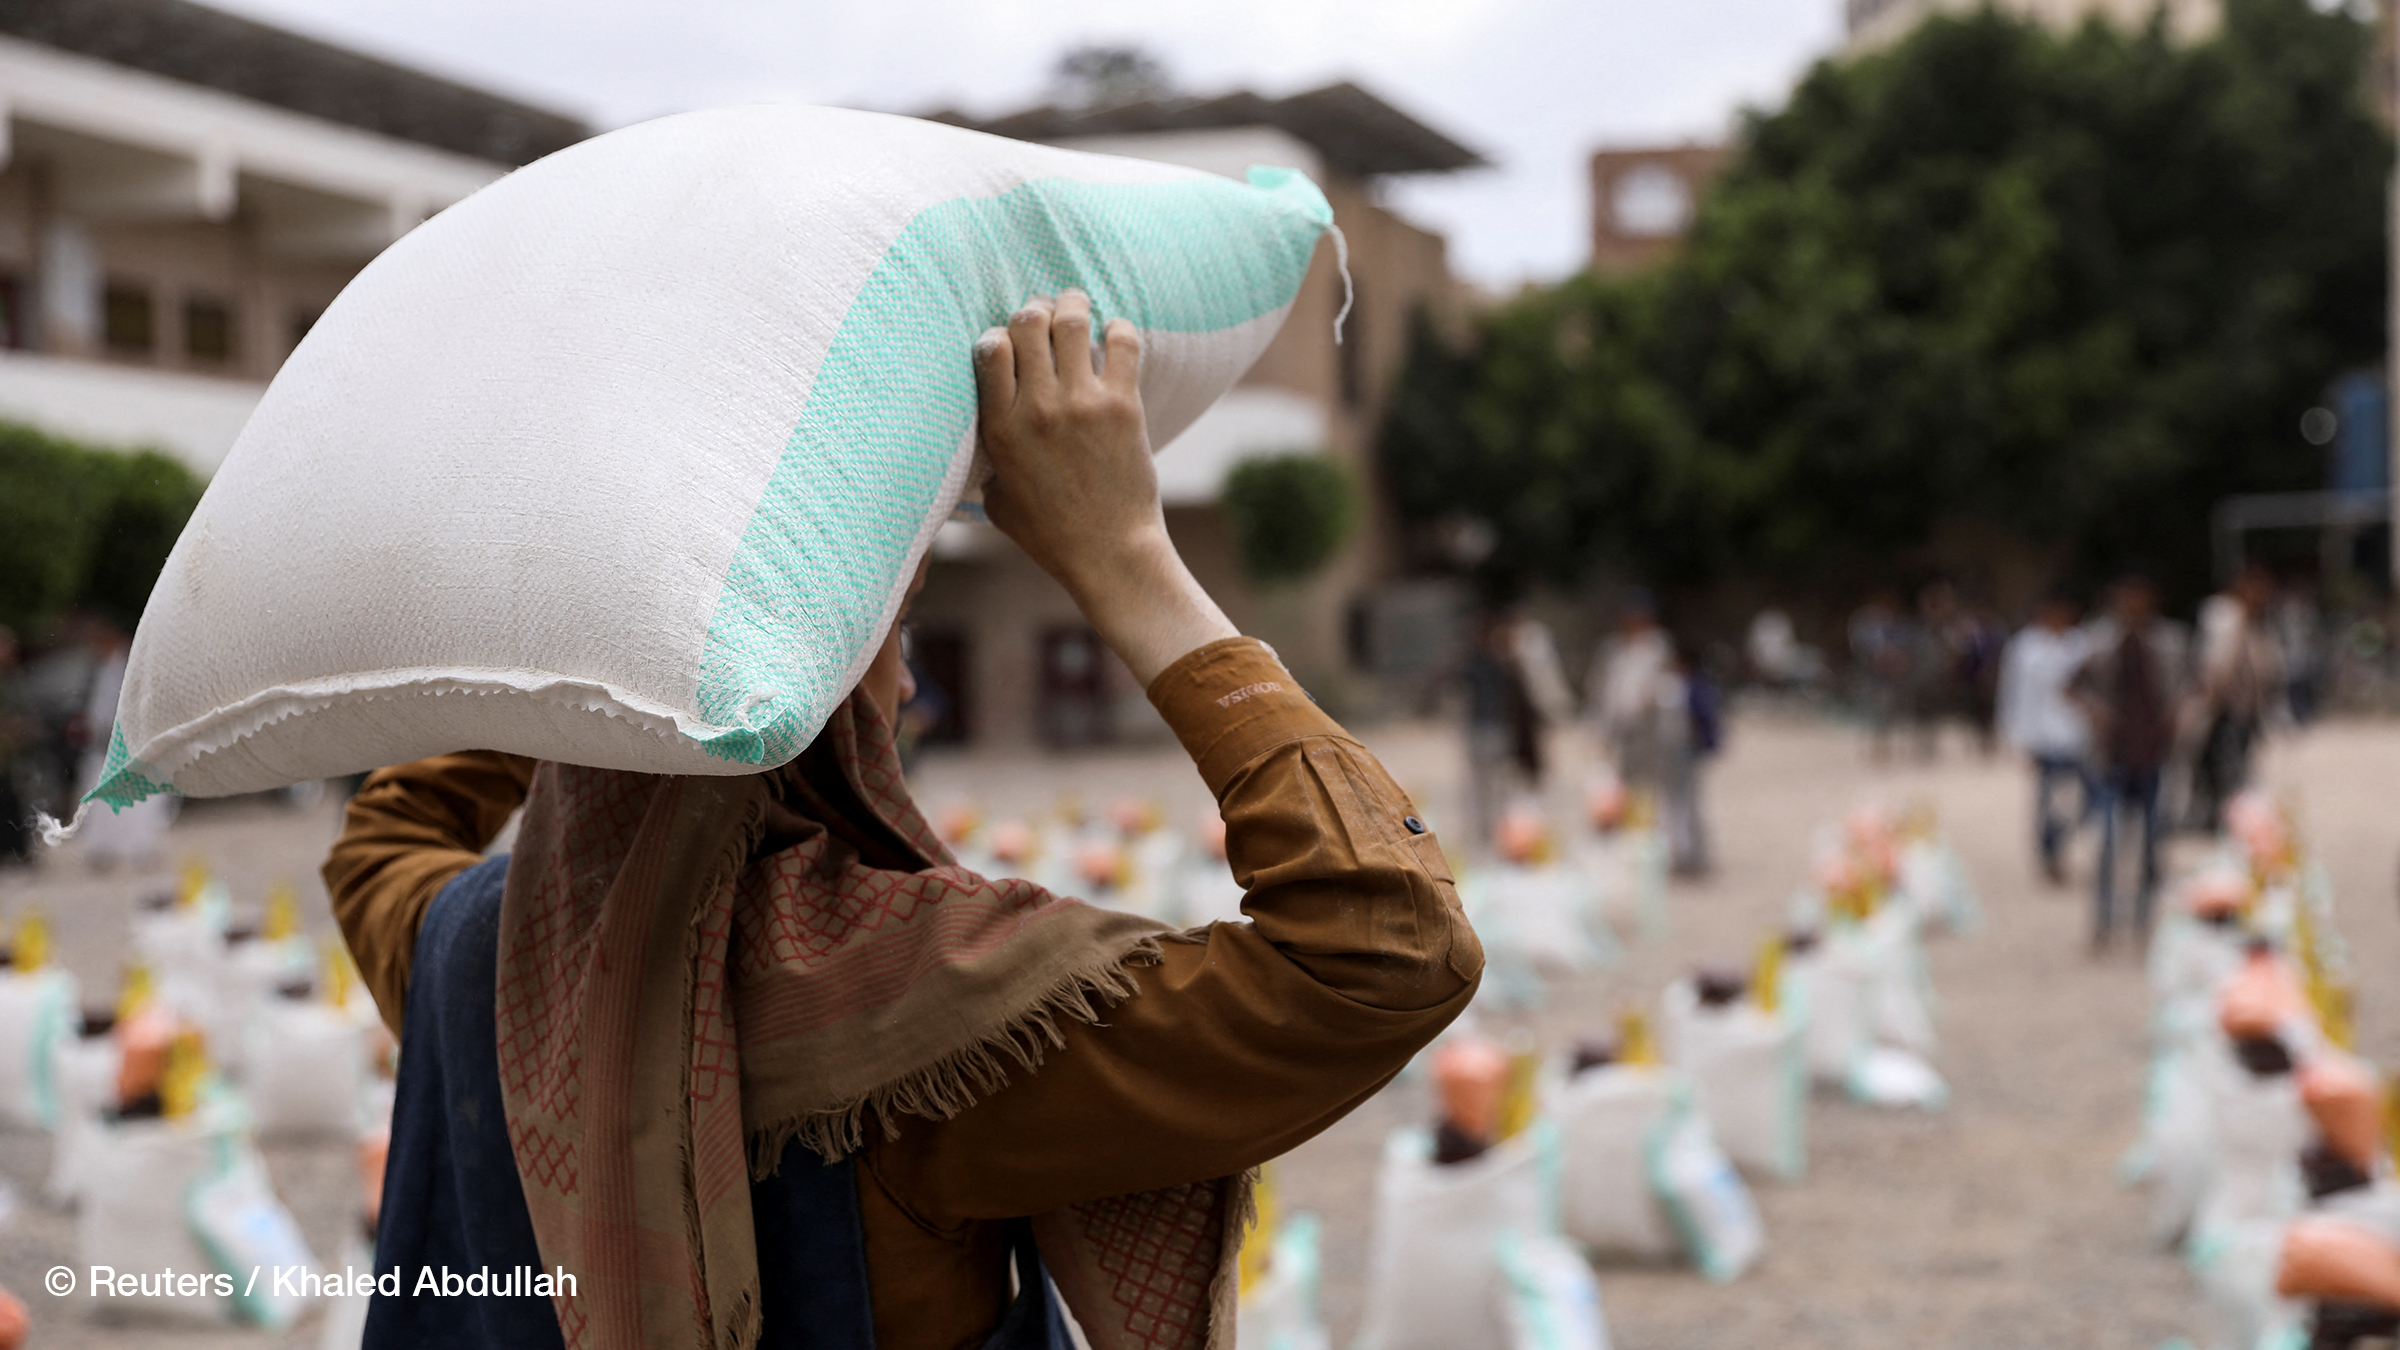 A worker carries a sack of wheat flour during the distribution of food aid by the local charity, Mona Relief, in Sanaa, Yemen April 24, 2022.